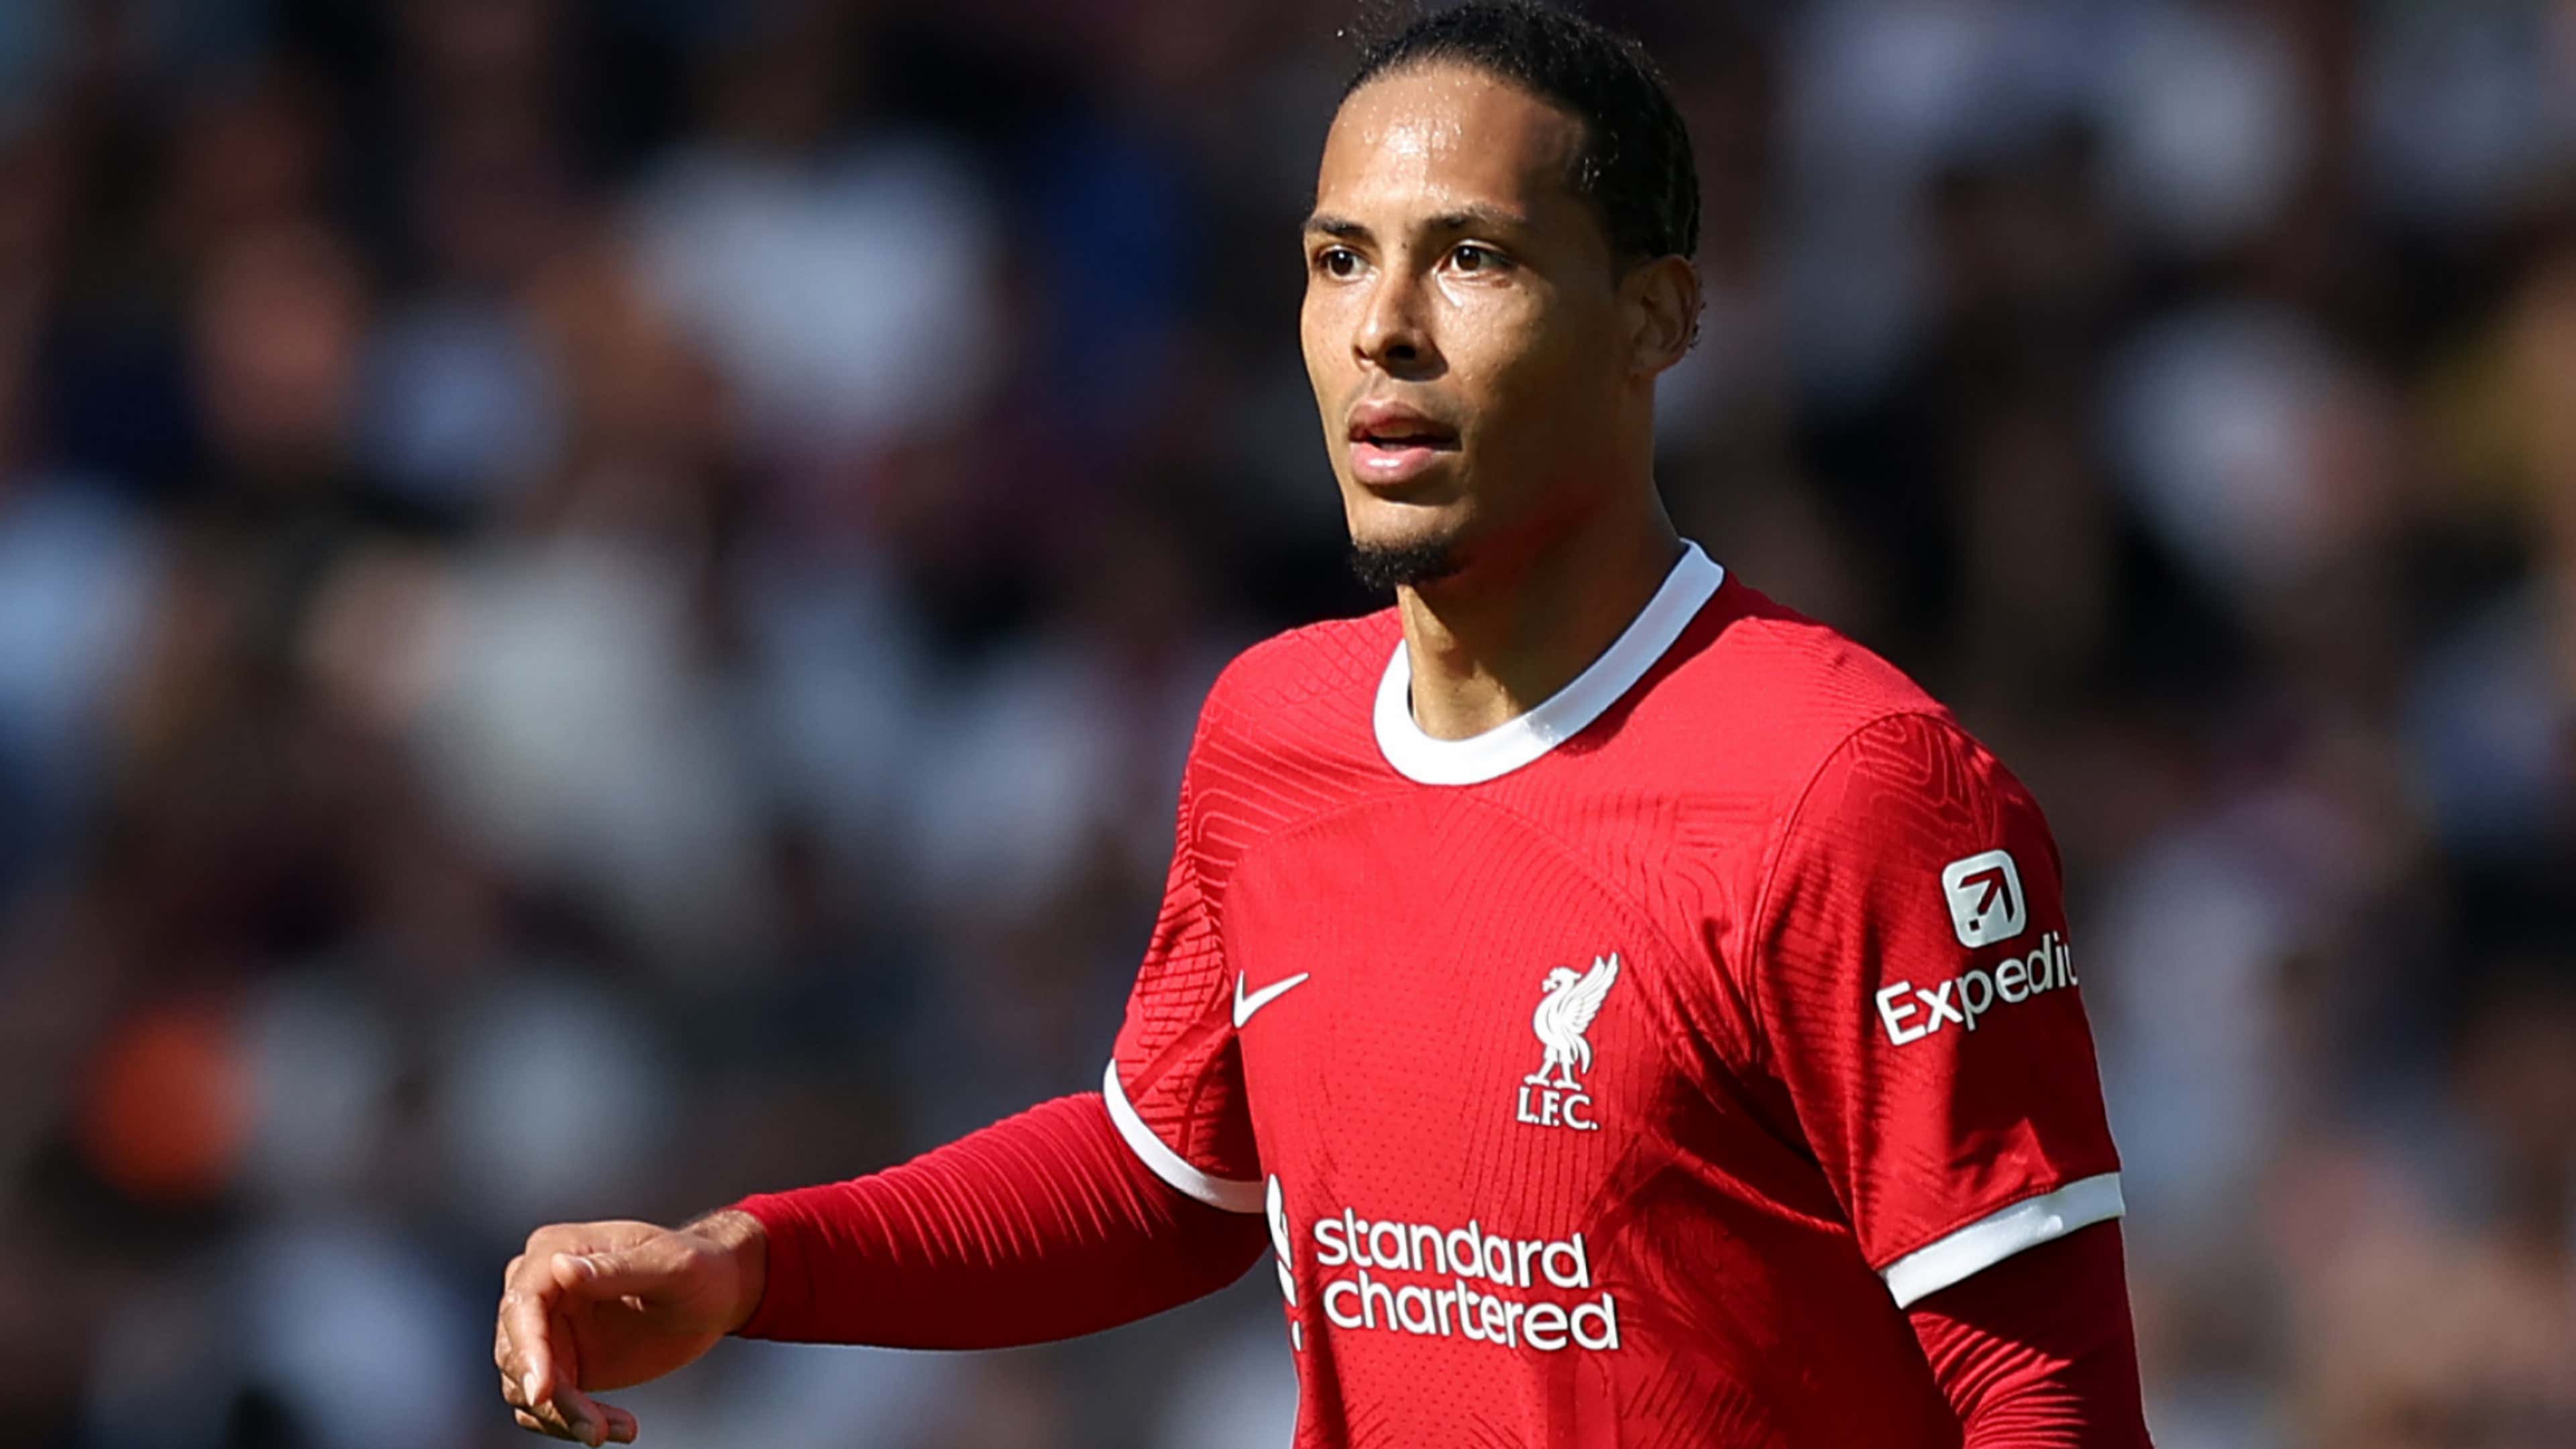 VVD: Liverpool were superior in every aspect, only one team tried to win